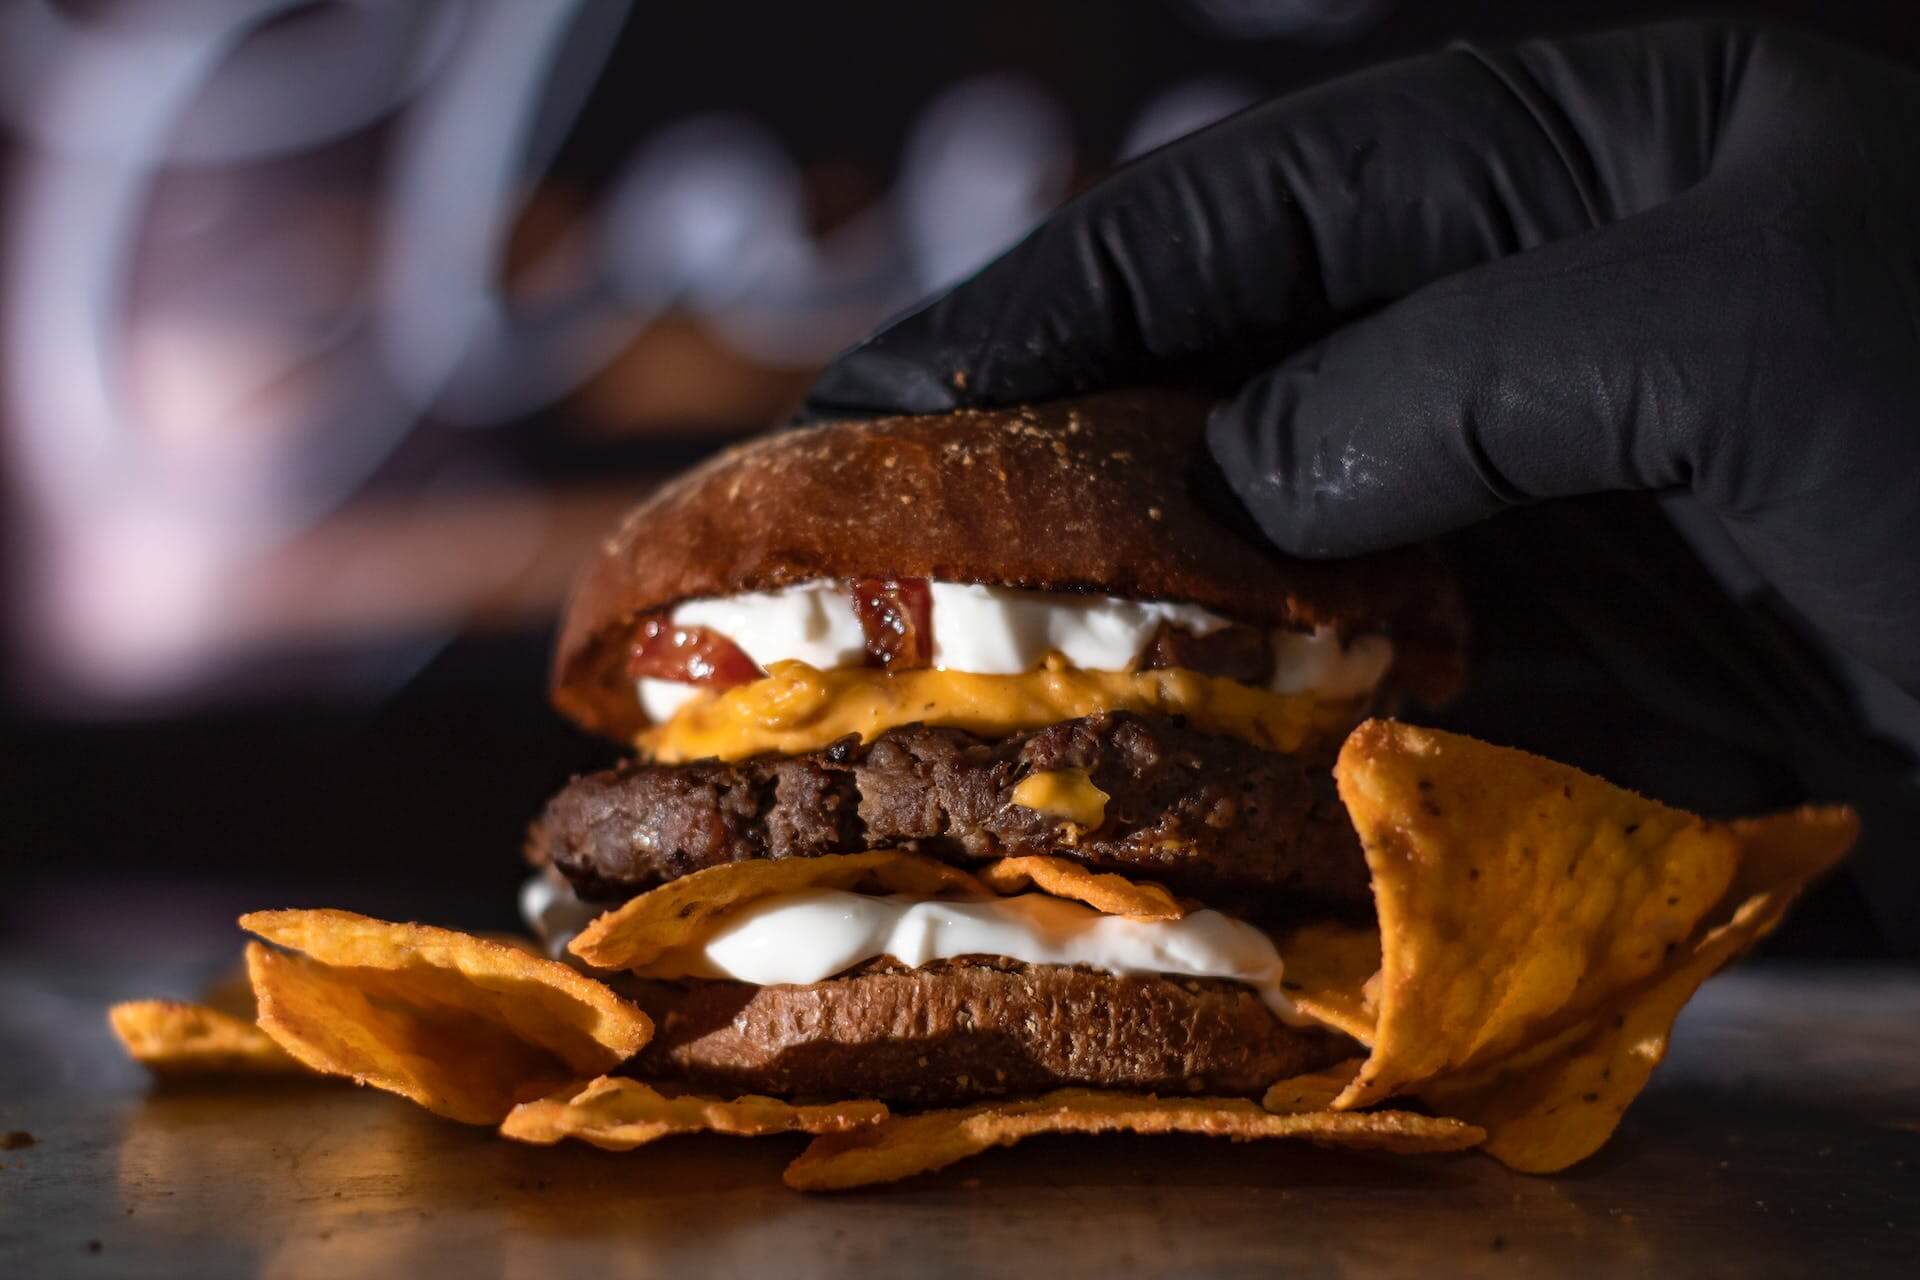 Gloved chef's hand pressing down on cheeseburger bun